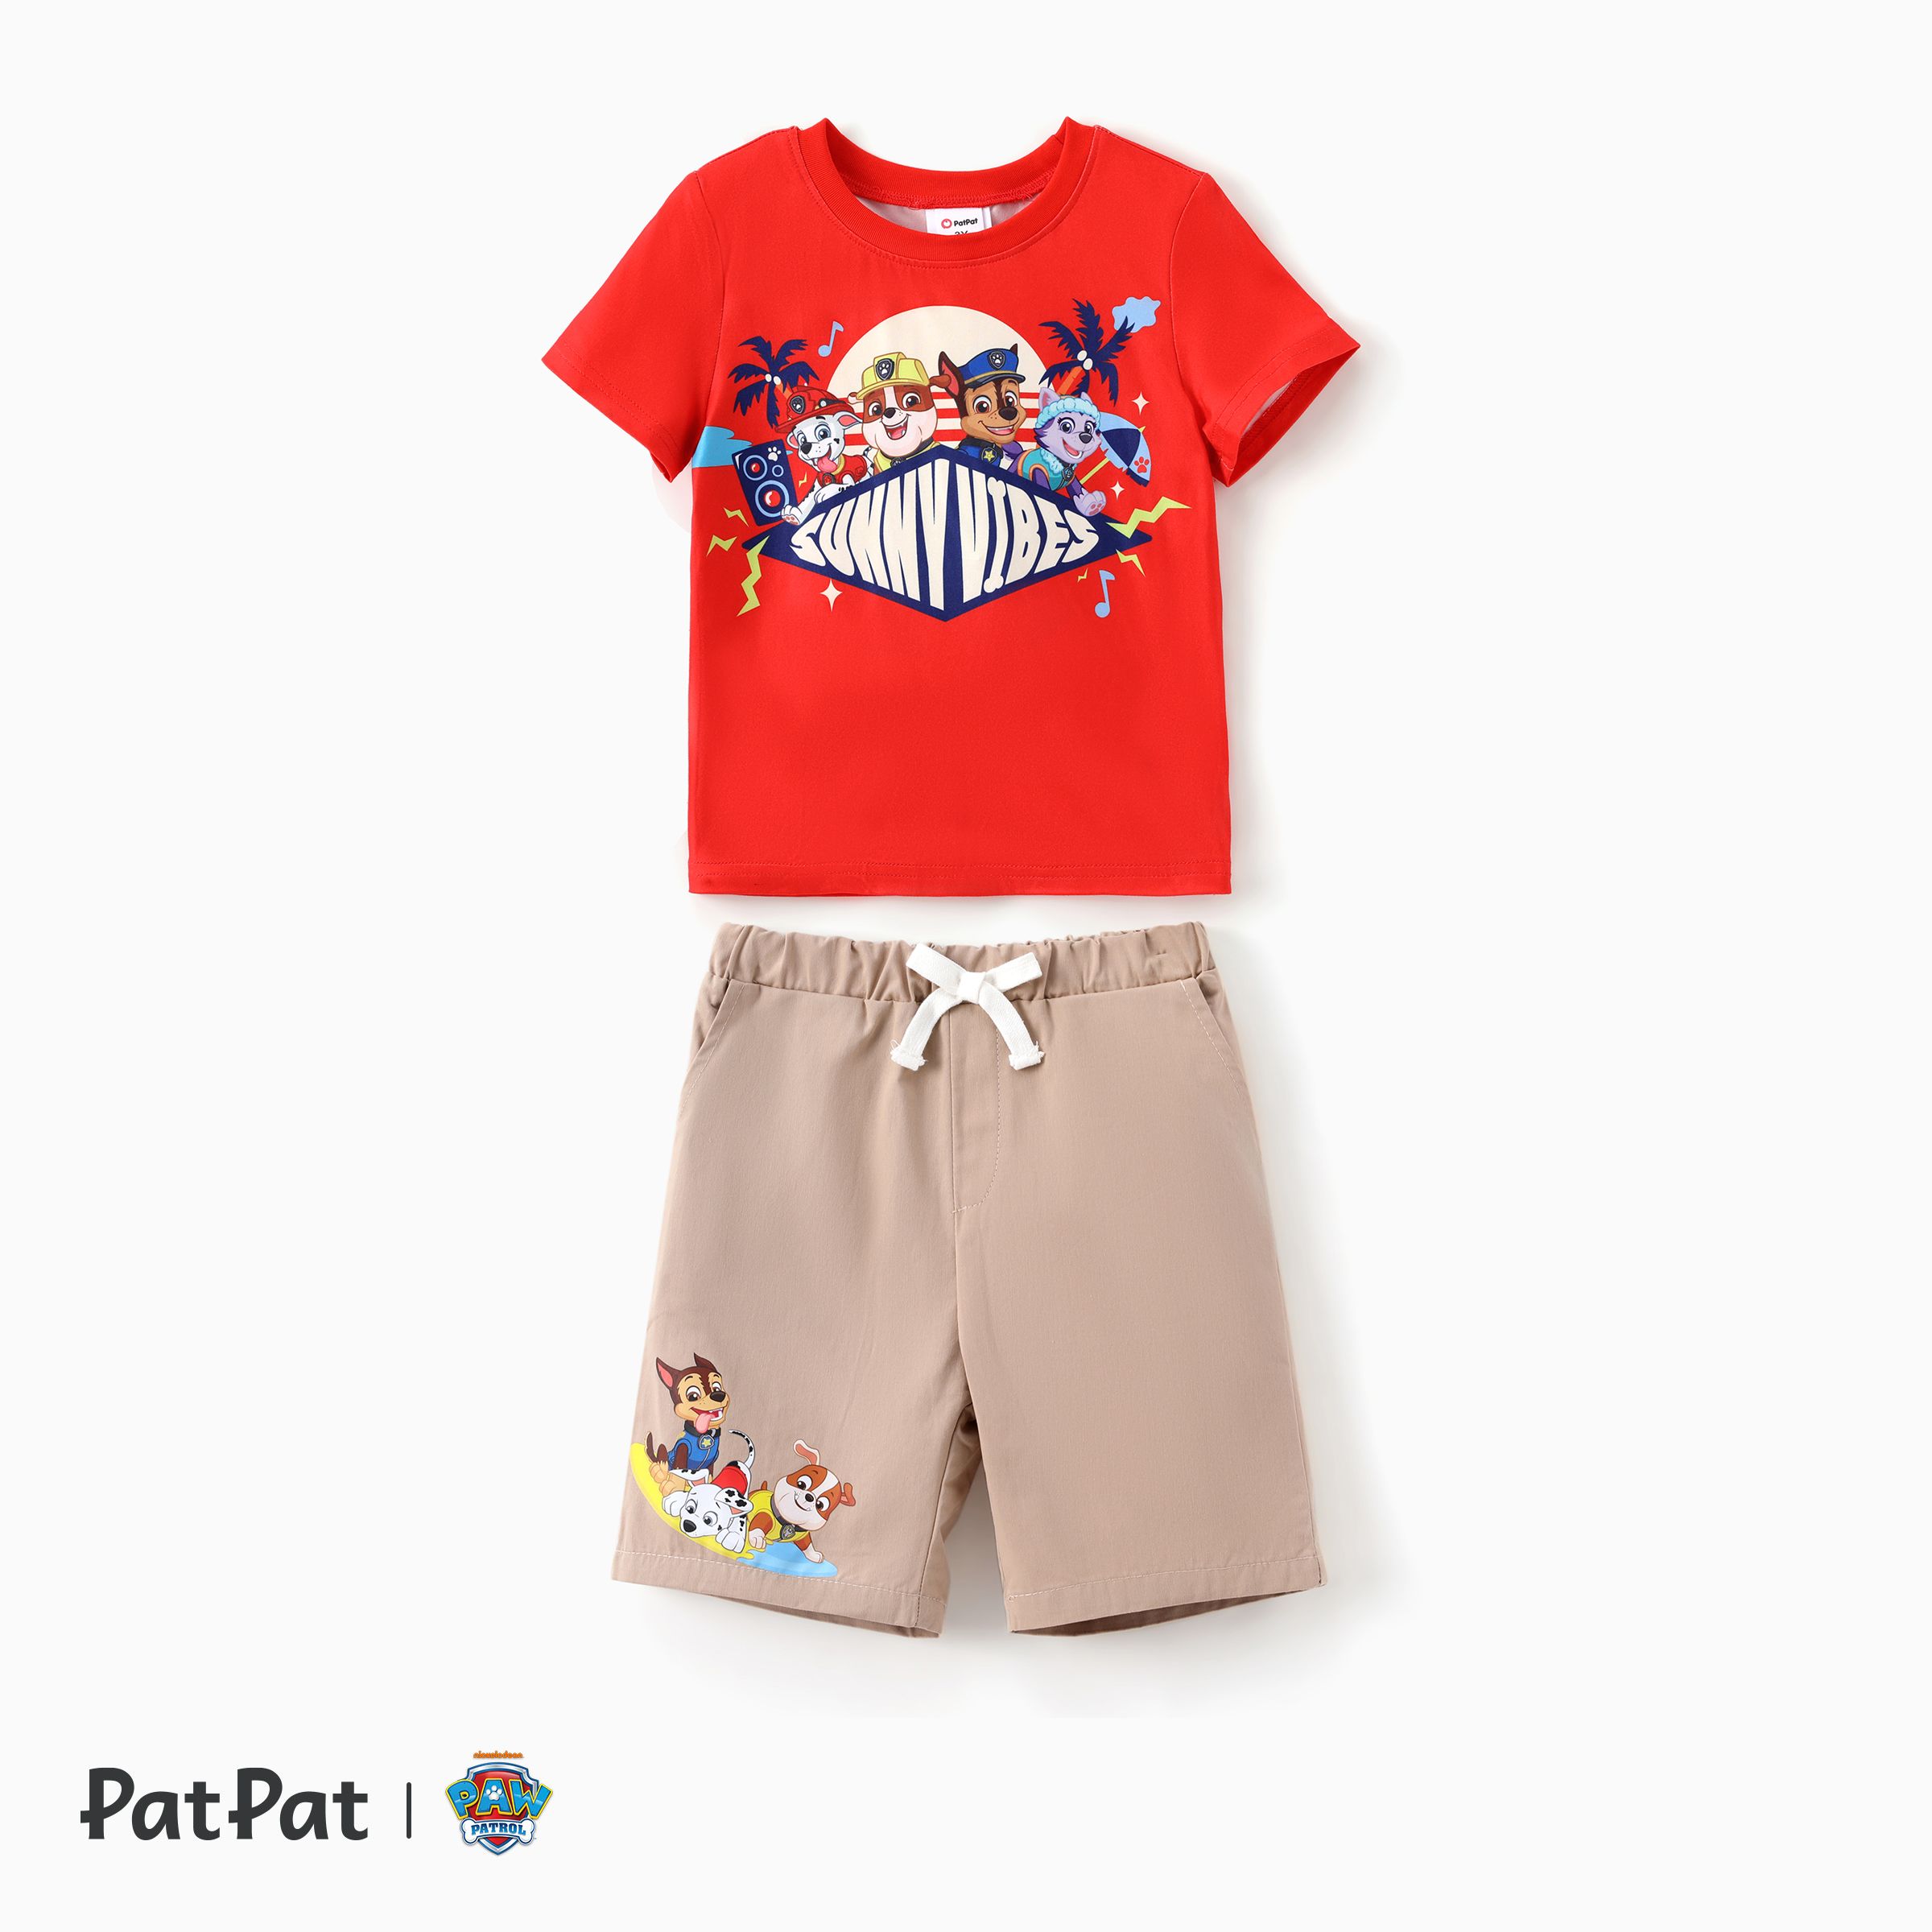 

Paw Patrol Toddler/Kid Boys 2pcs Beach-themed Pineapple Character Print Tee with Shorts Set